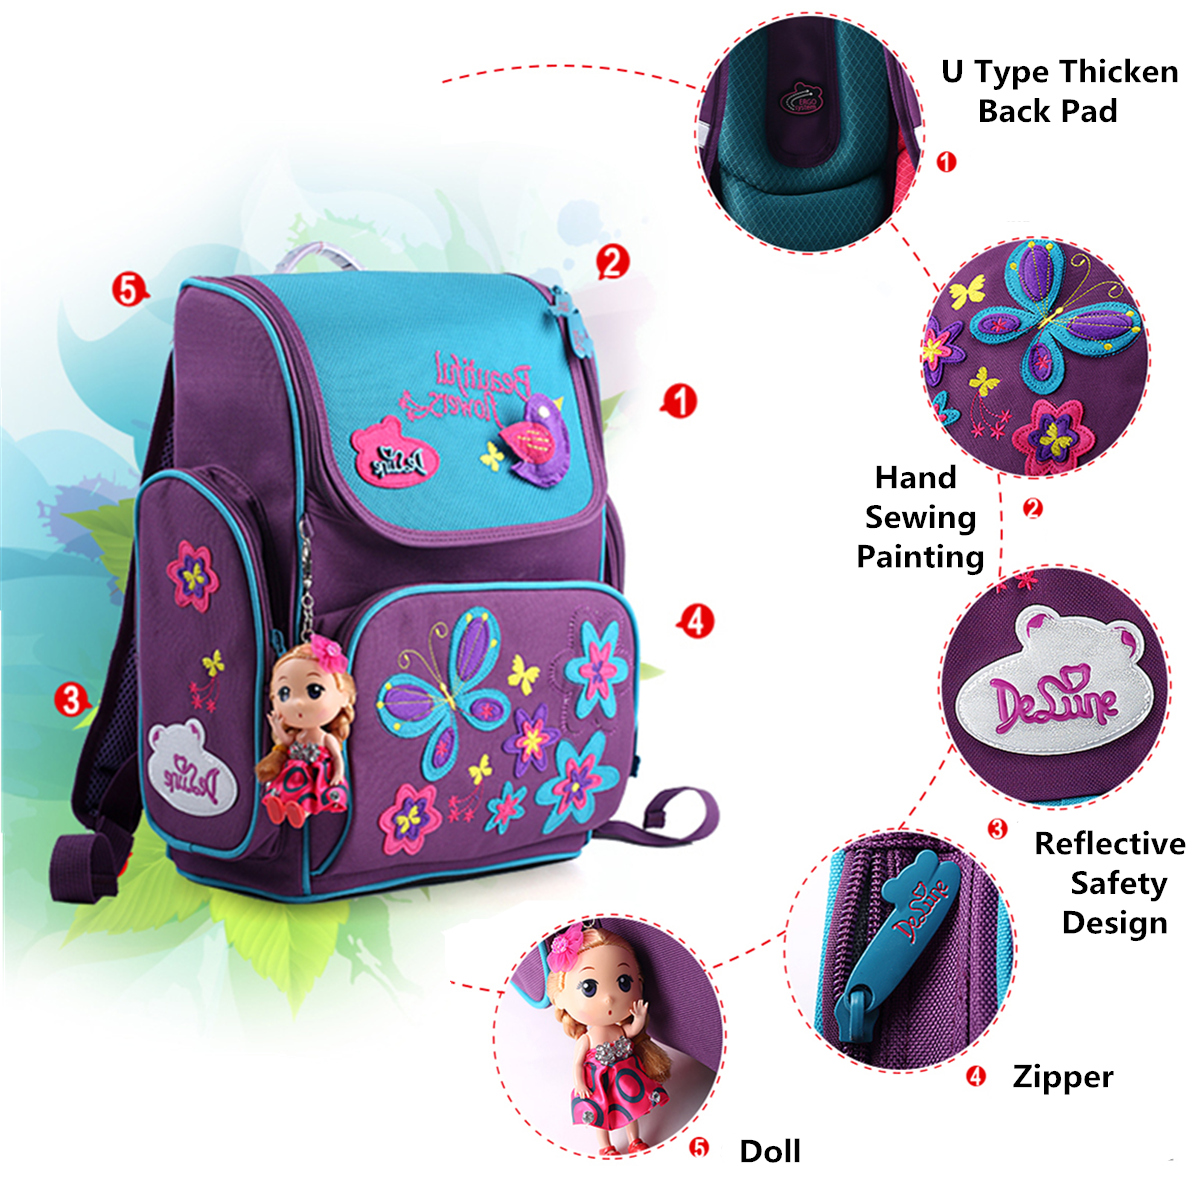 18L-Girls-Kids-Cartoon-School-Bag-Reflective-Safety-Waterproof-Children-Backpack-With-Doll-Pendant-1352202-3